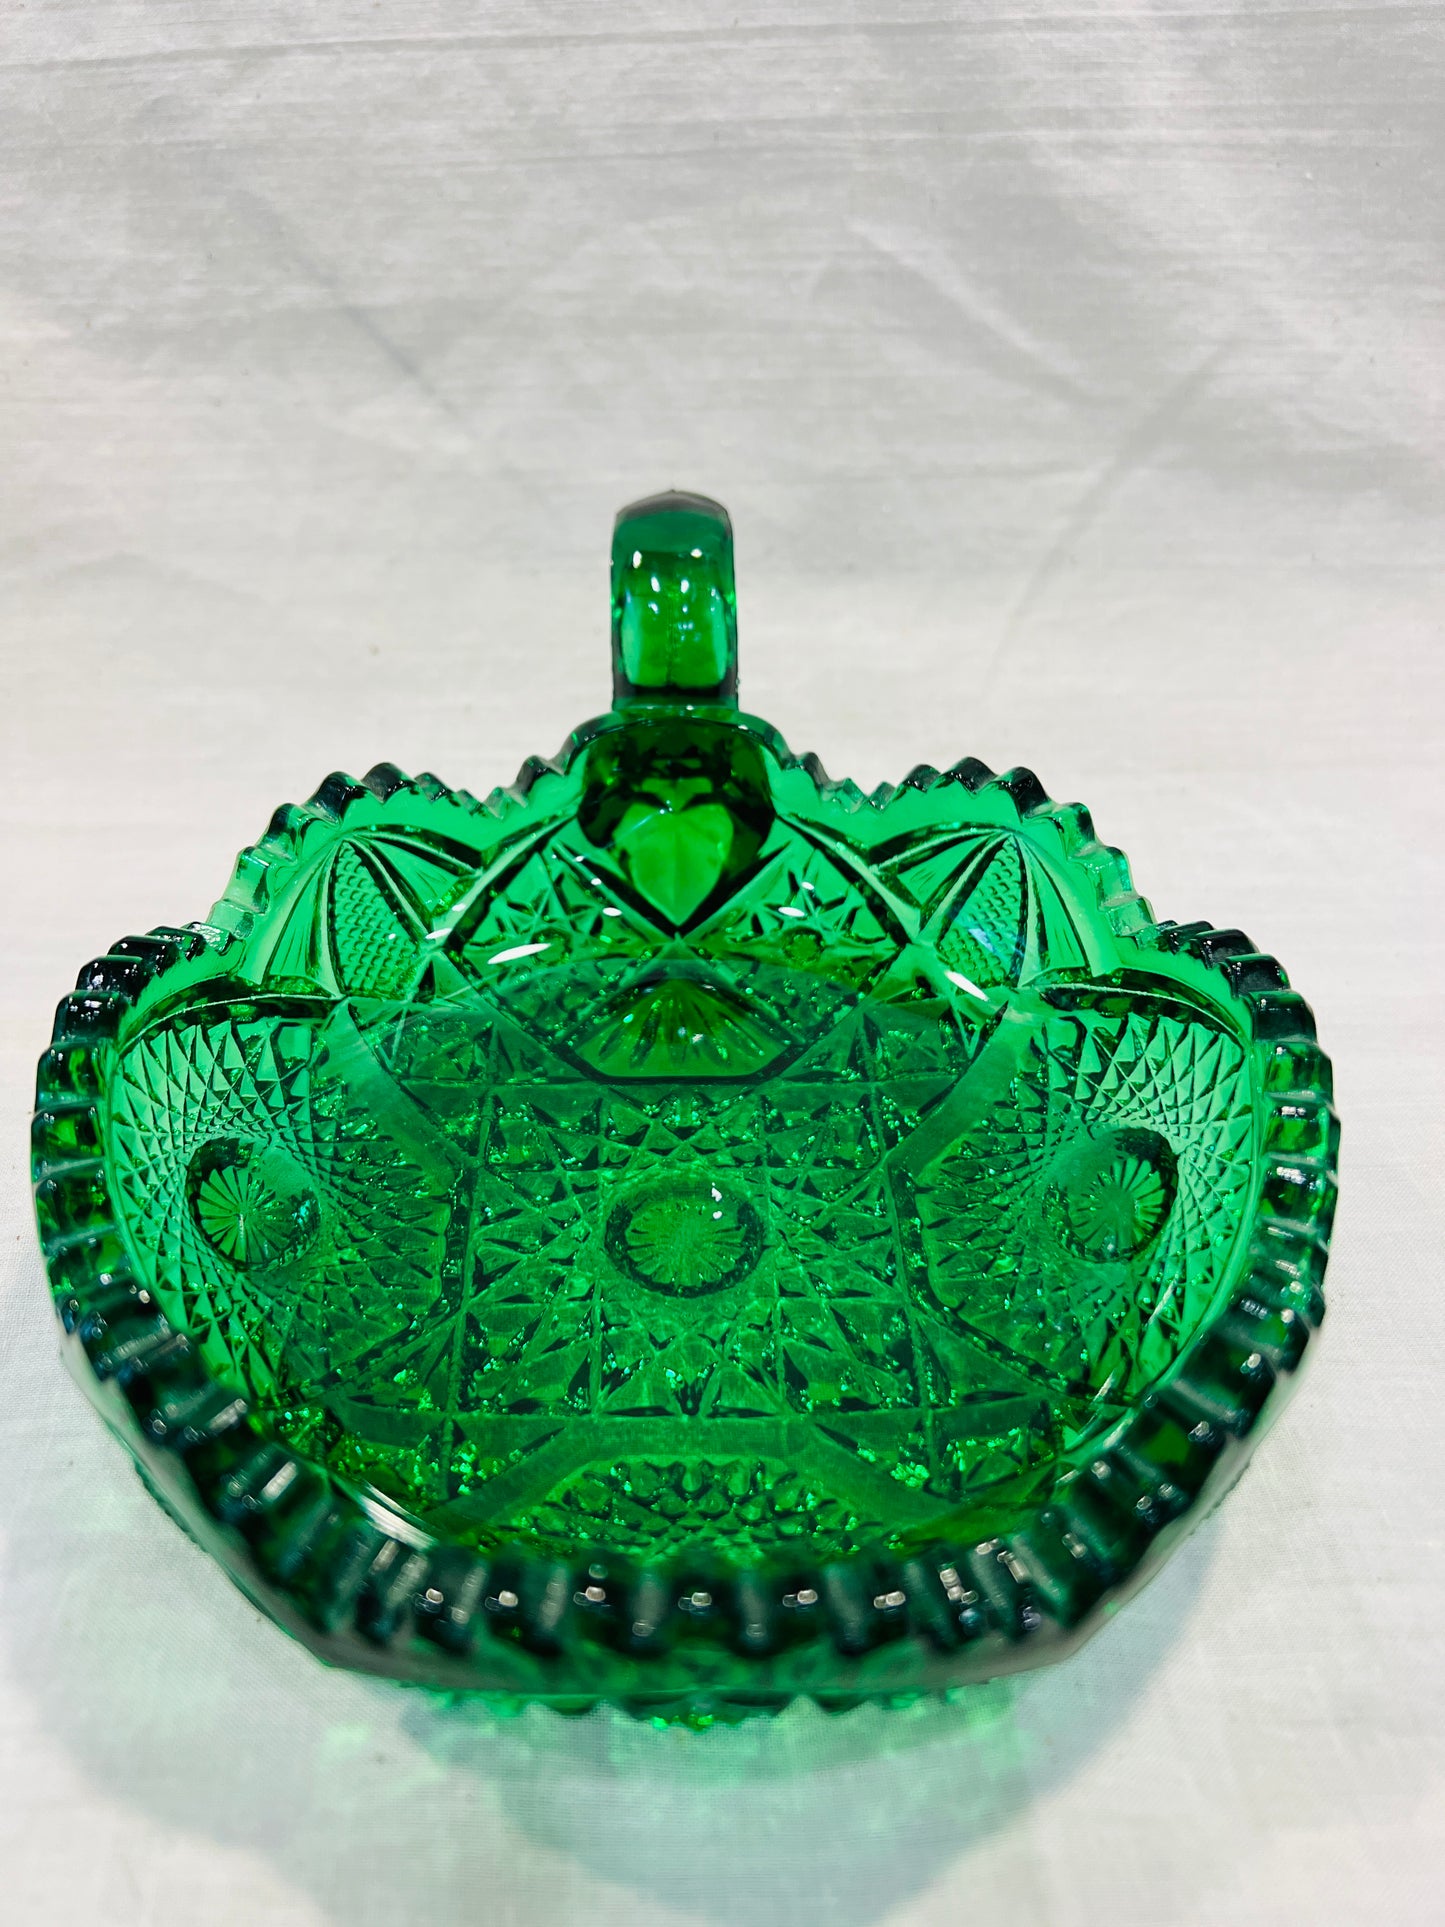 Vintage Green Glass Candle Holder (candle not included)